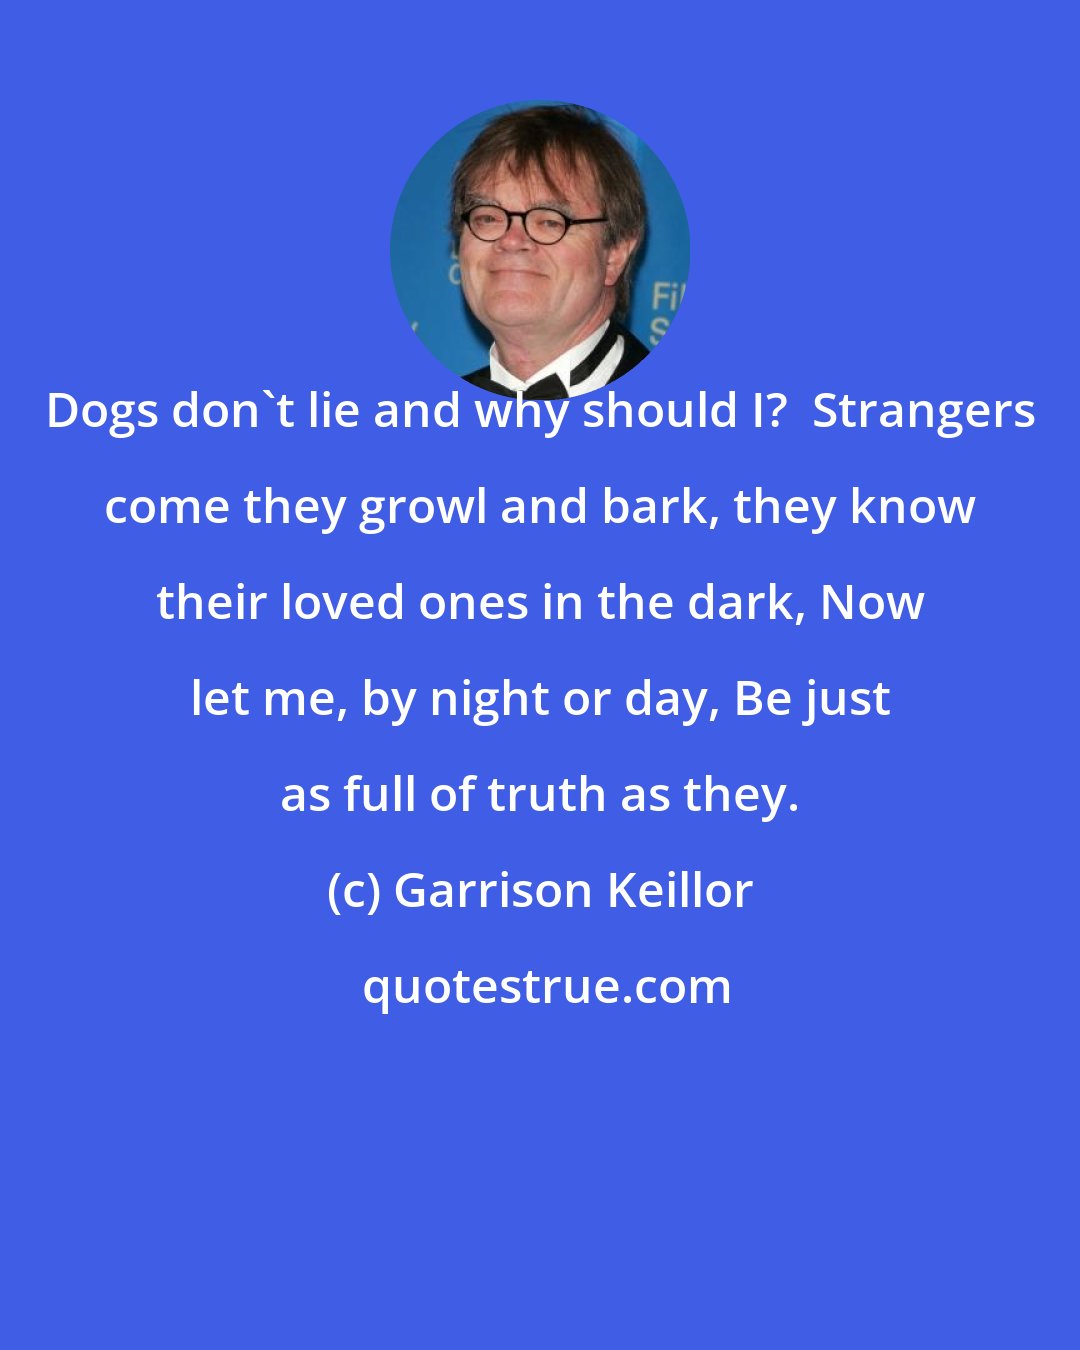 Garrison Keillor: Dogs don't lie and why should I?  Strangers come they growl and bark, they know their loved ones in the dark, Now let me, by night or day, Be just as full of truth as they.